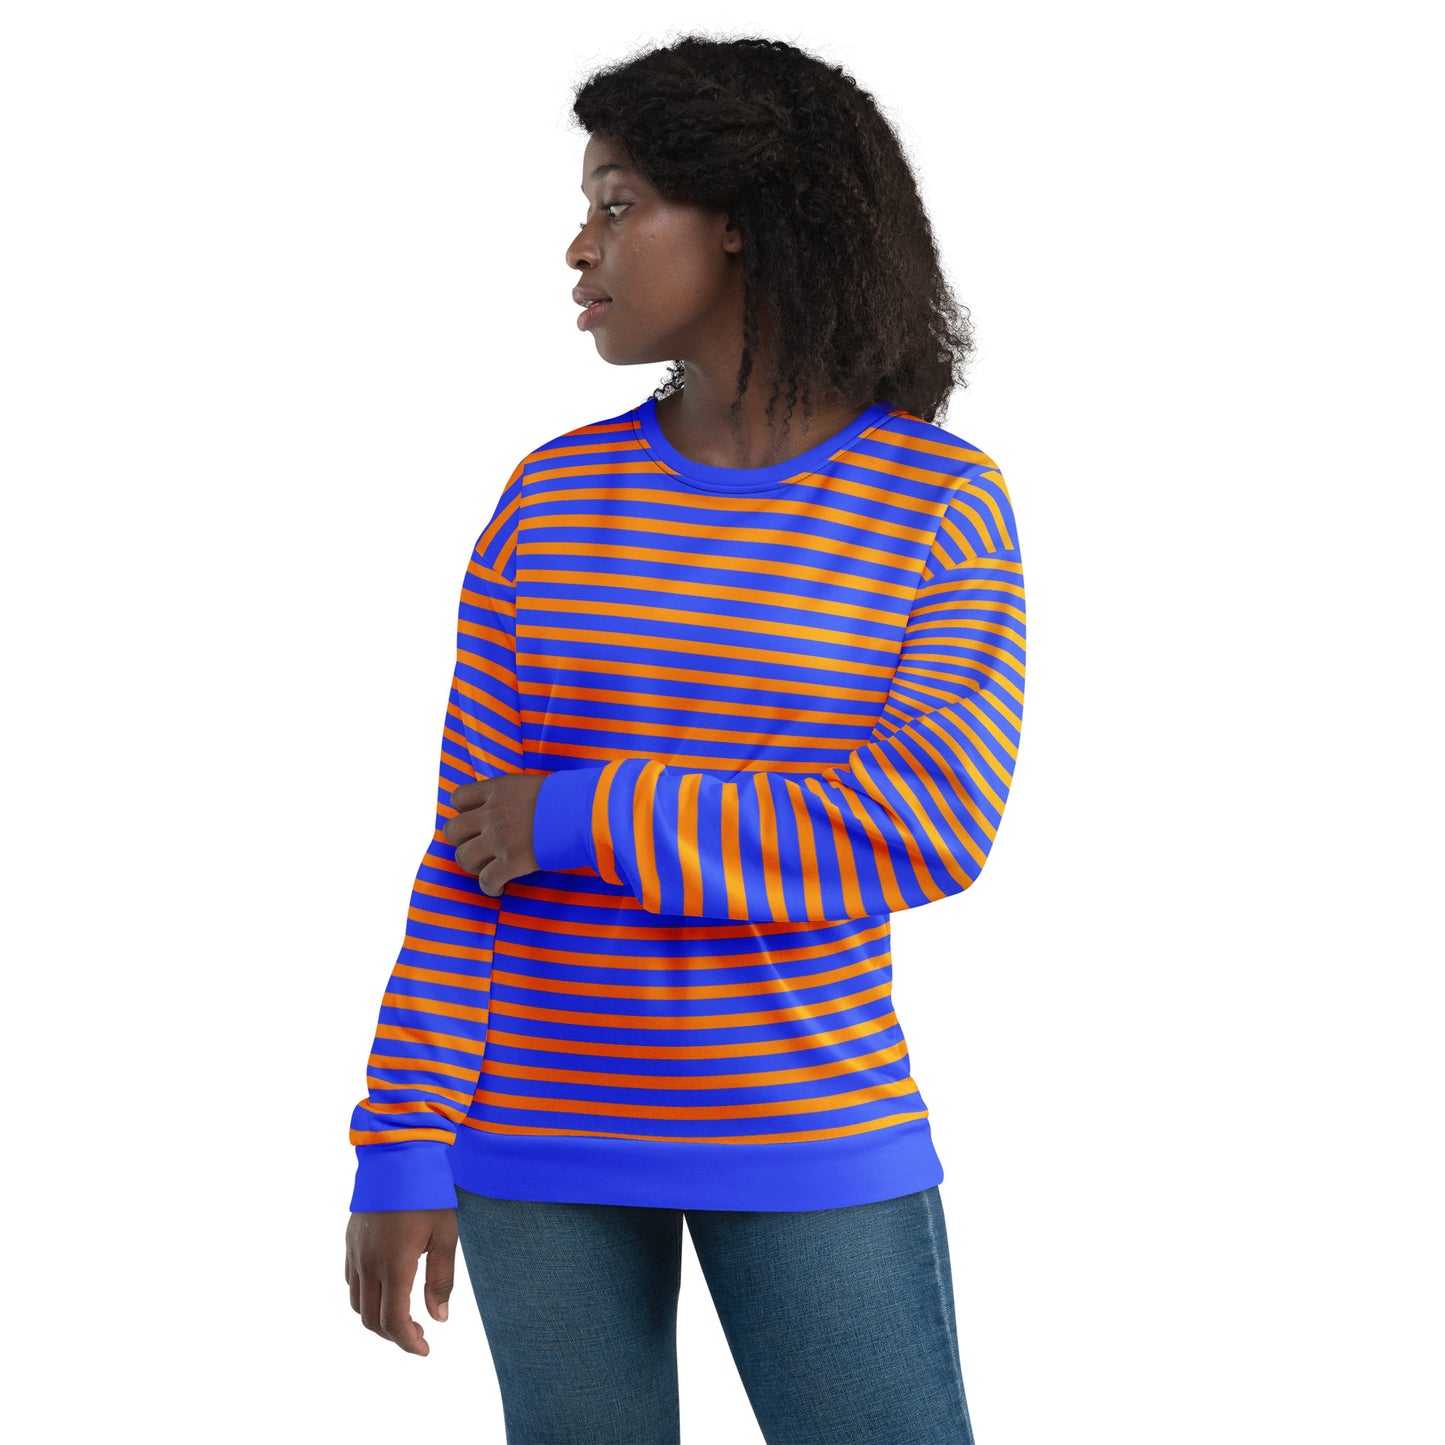 Blue and Orange Striped Sweater: A Classic Knit for Men and Women